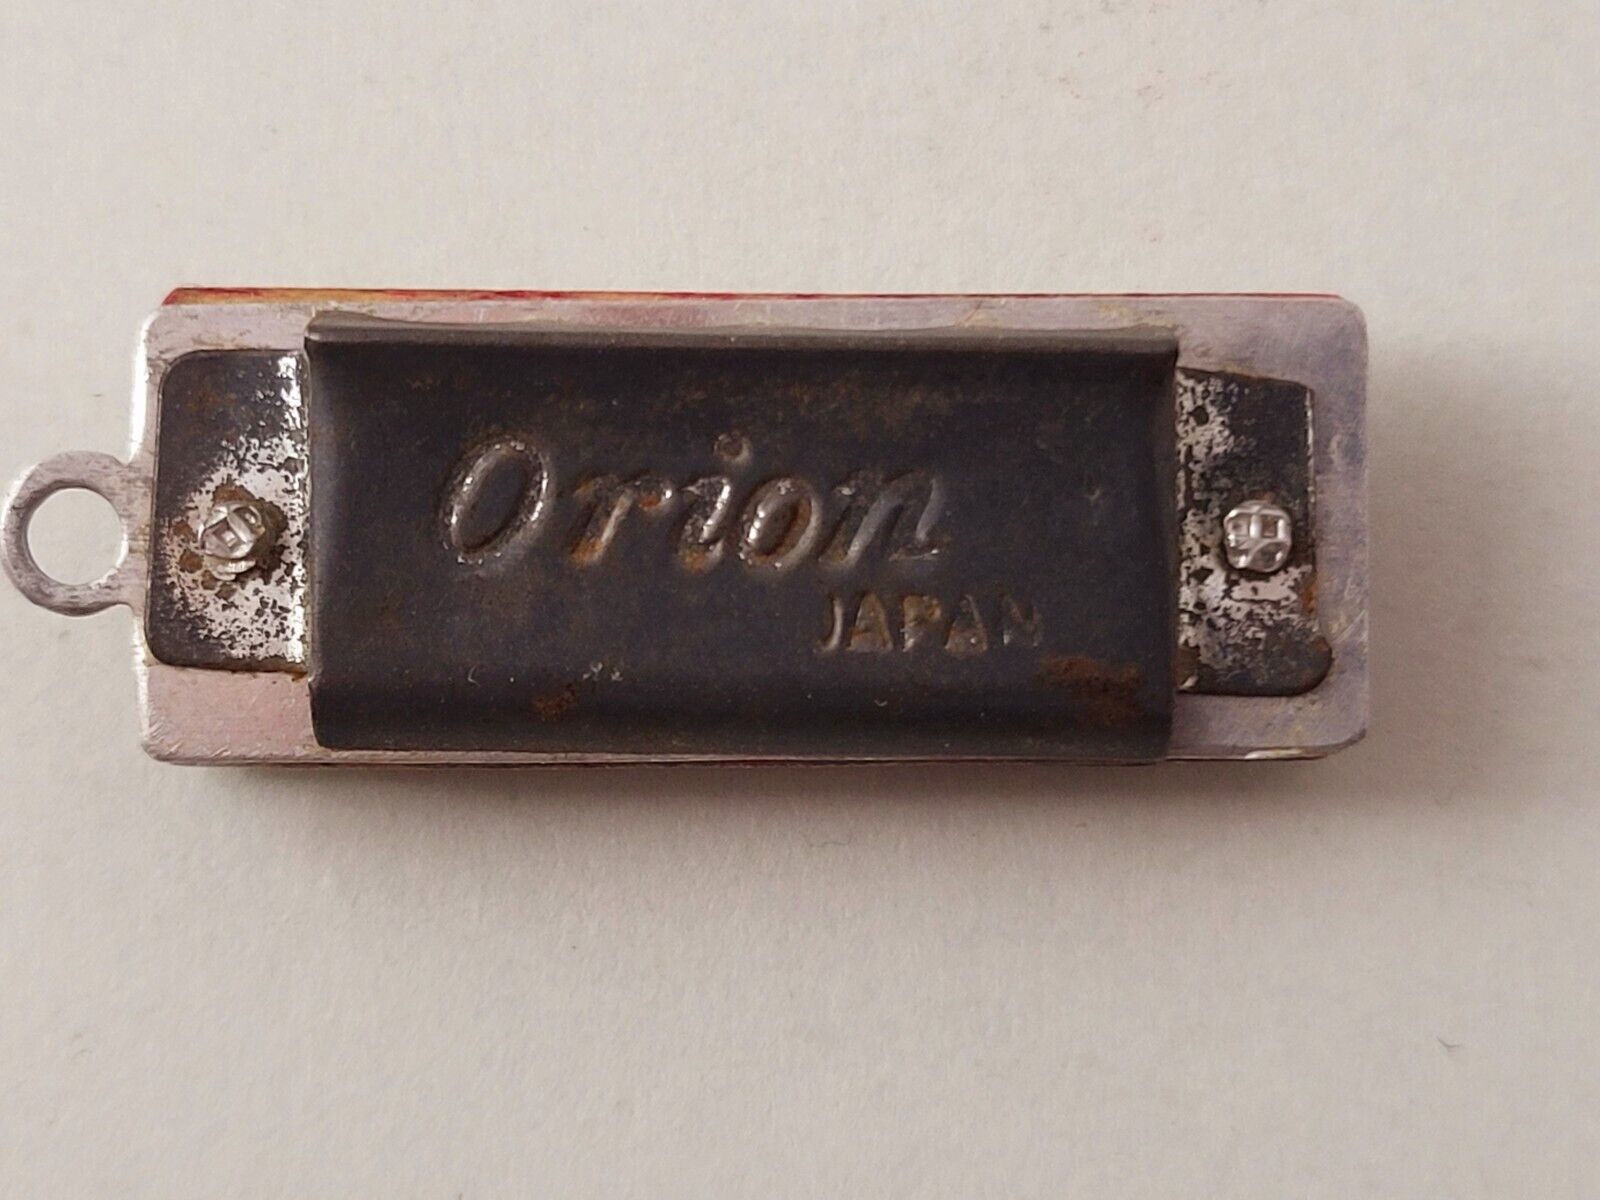 Vintage Orion Miniature Harmonica Made In Japan